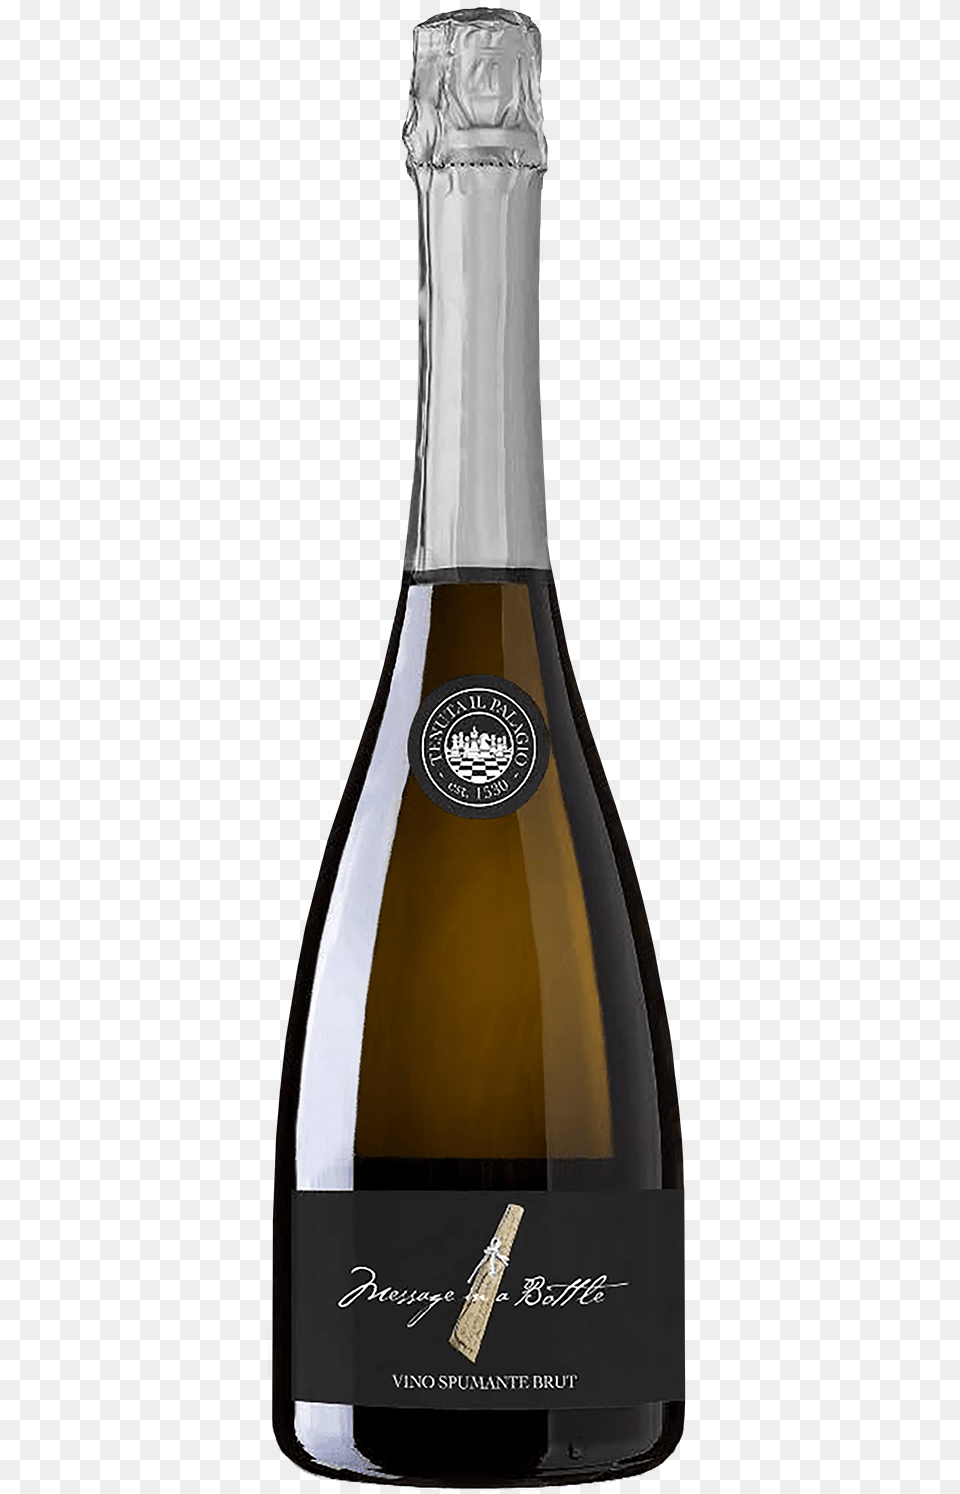 Il Palagio Message In A Bottle Bianco Spumante I Beer, Alcohol, Beverage, Wine, Liquor Free Png